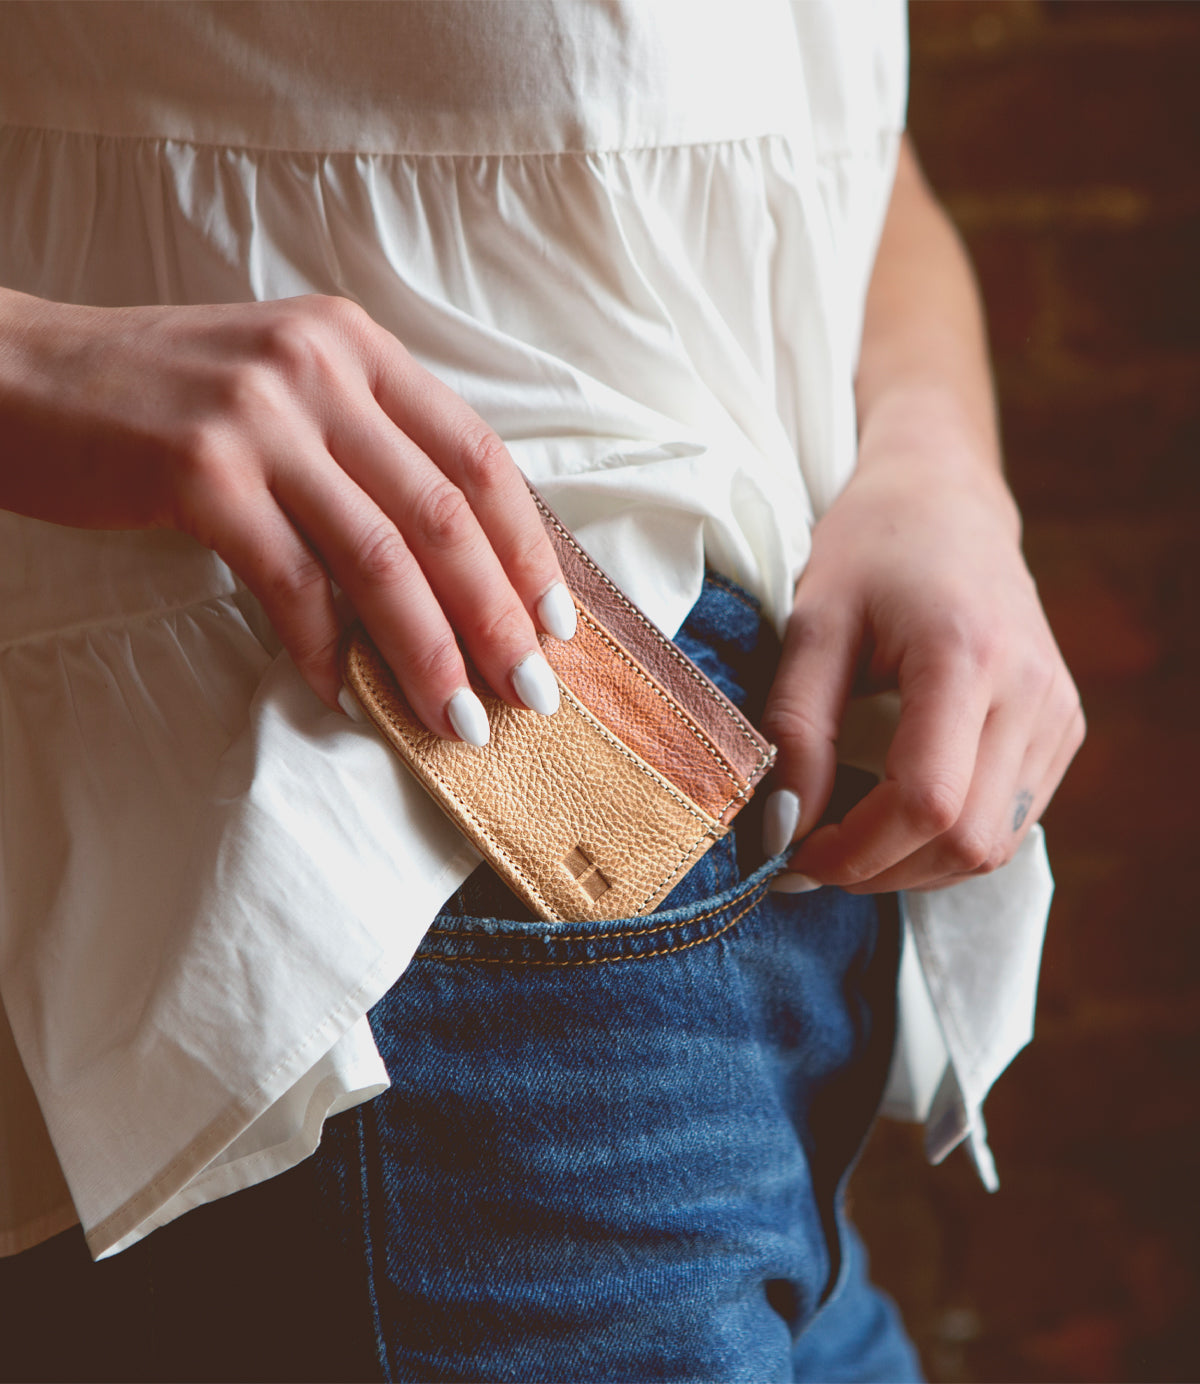 A person putting a Bed Stu Chuck card wallet in their pocket.